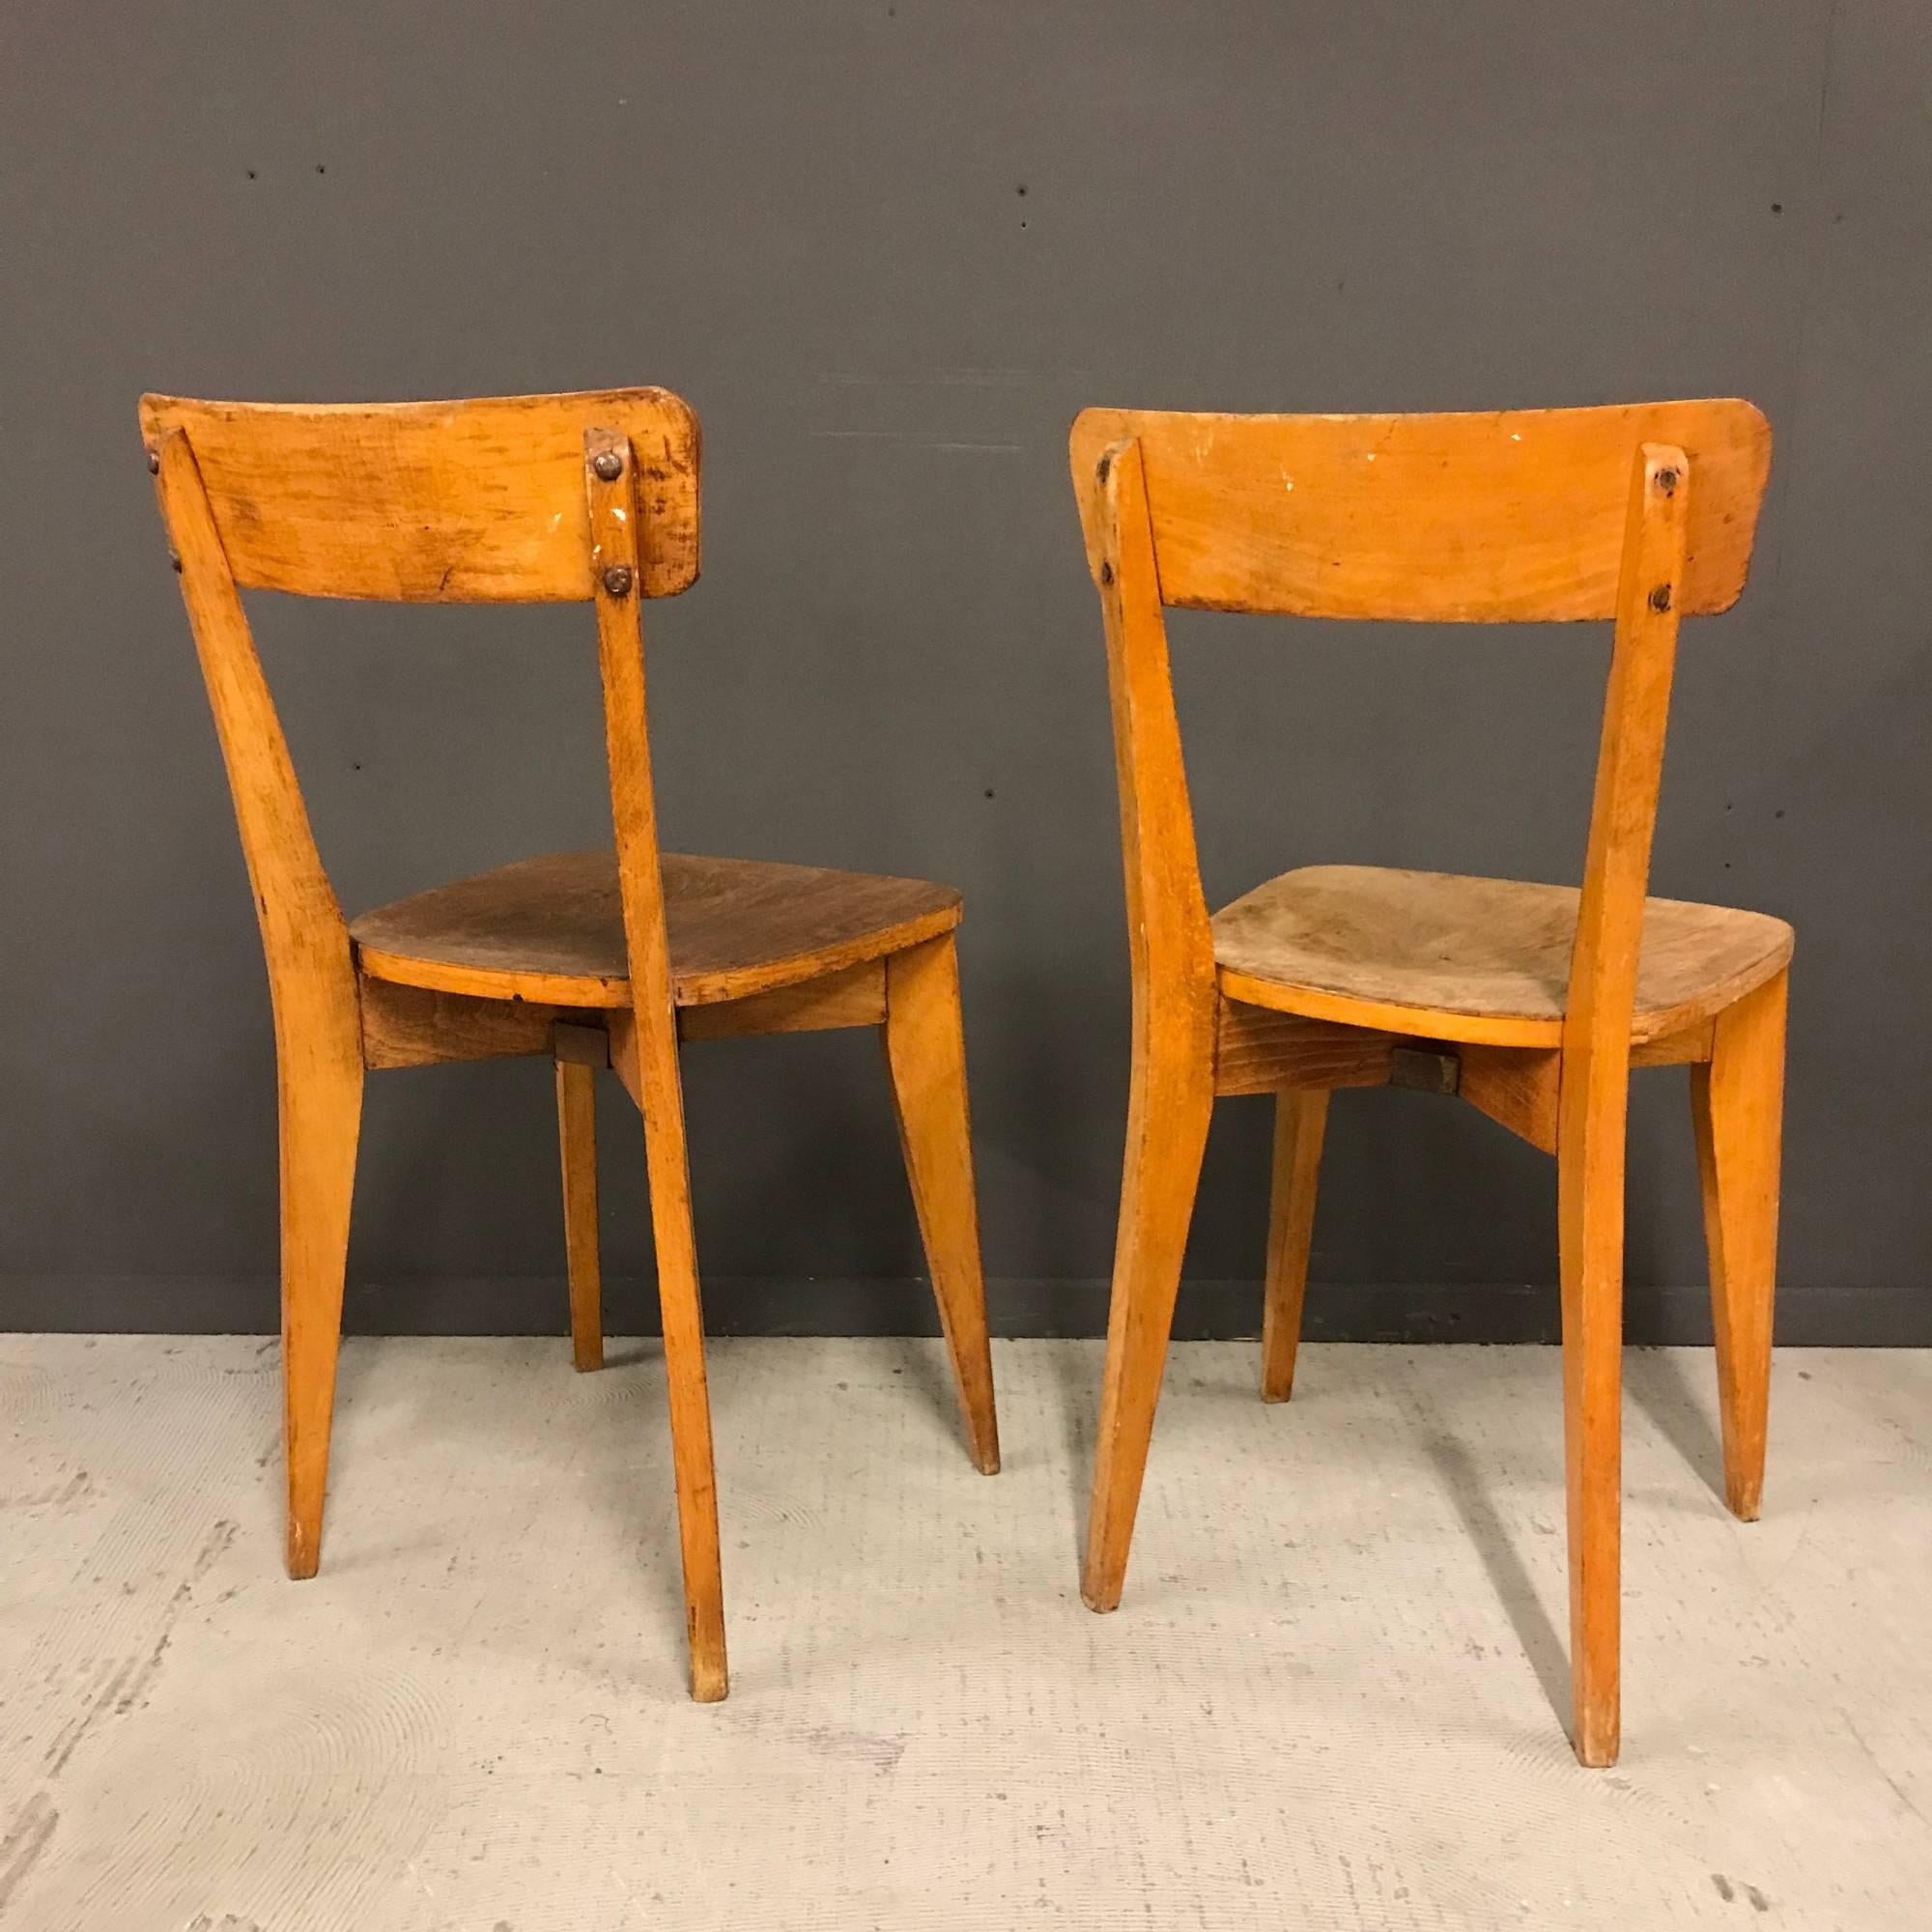 Nice pair of vintage wooden bistro chairs. Made during the early 20th century. Unfortunately one of the seating is damaged. Rest remains in good condition.